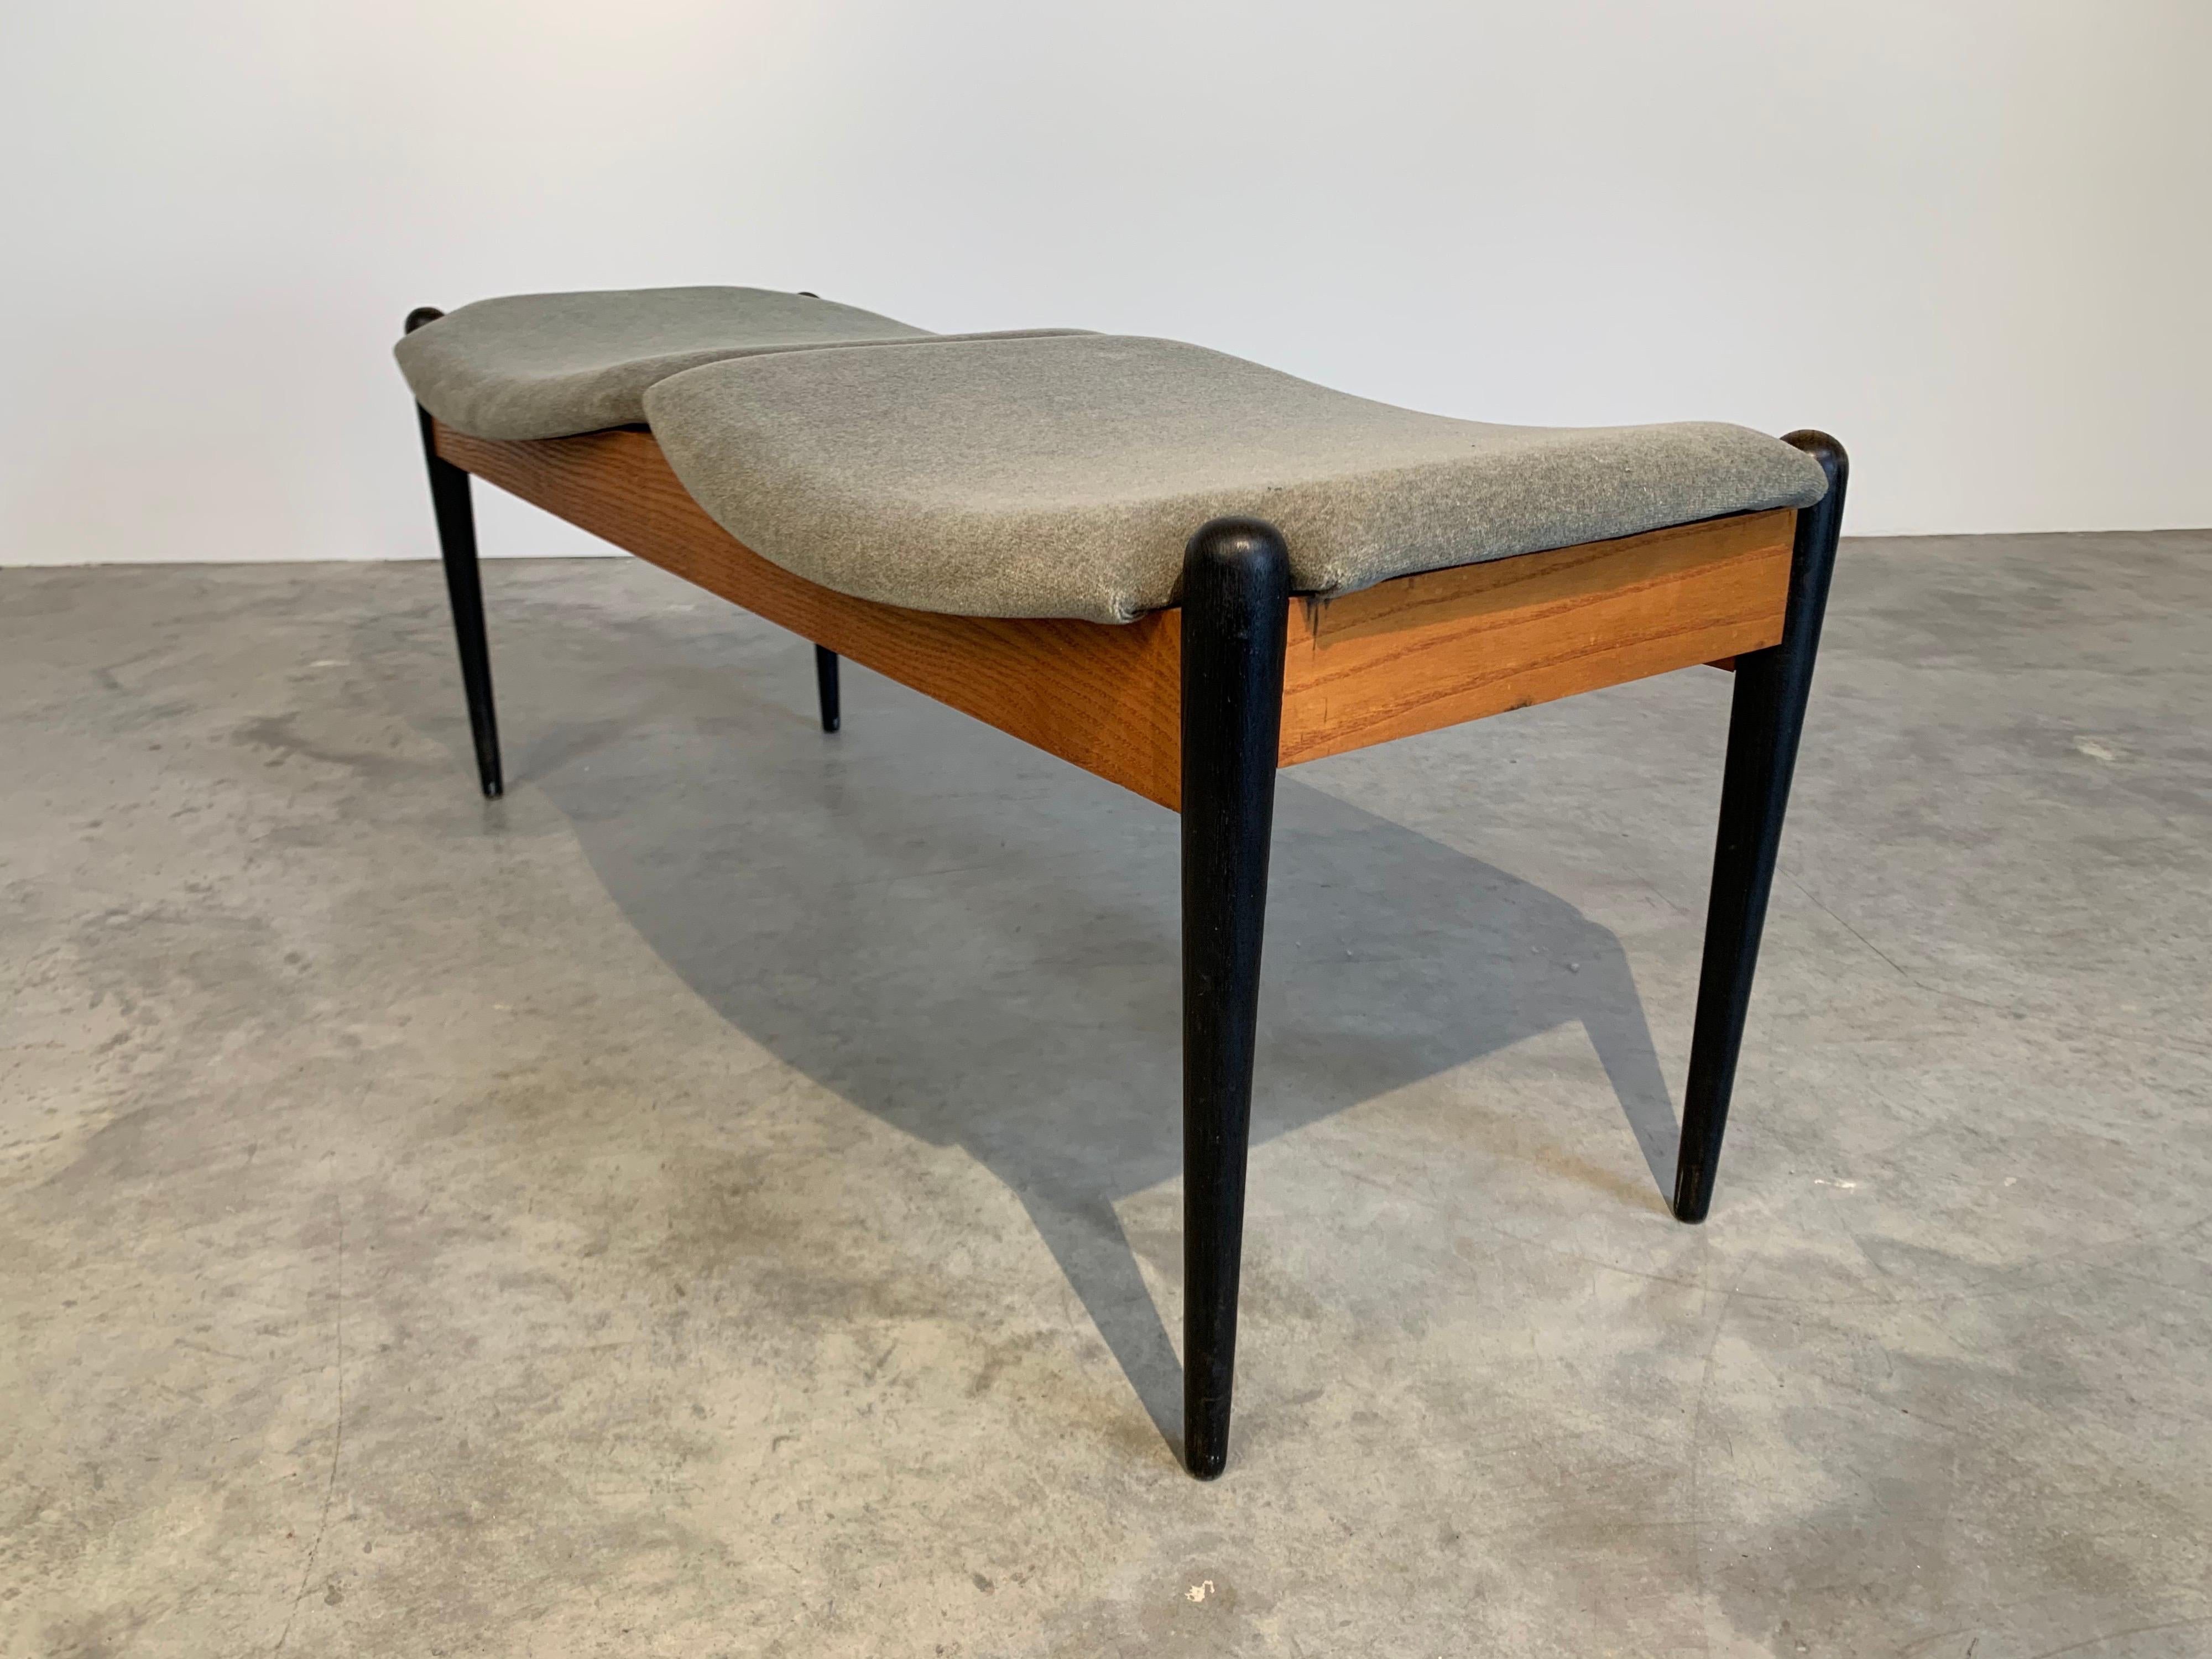 A beautiful and very sleek atomic era bench designed by Arthur Umanoff having mild green mohair upholstery, Circa 1950
In outstanding condition. Mohair is fresh and the frame is solid. Clean and ready for use!